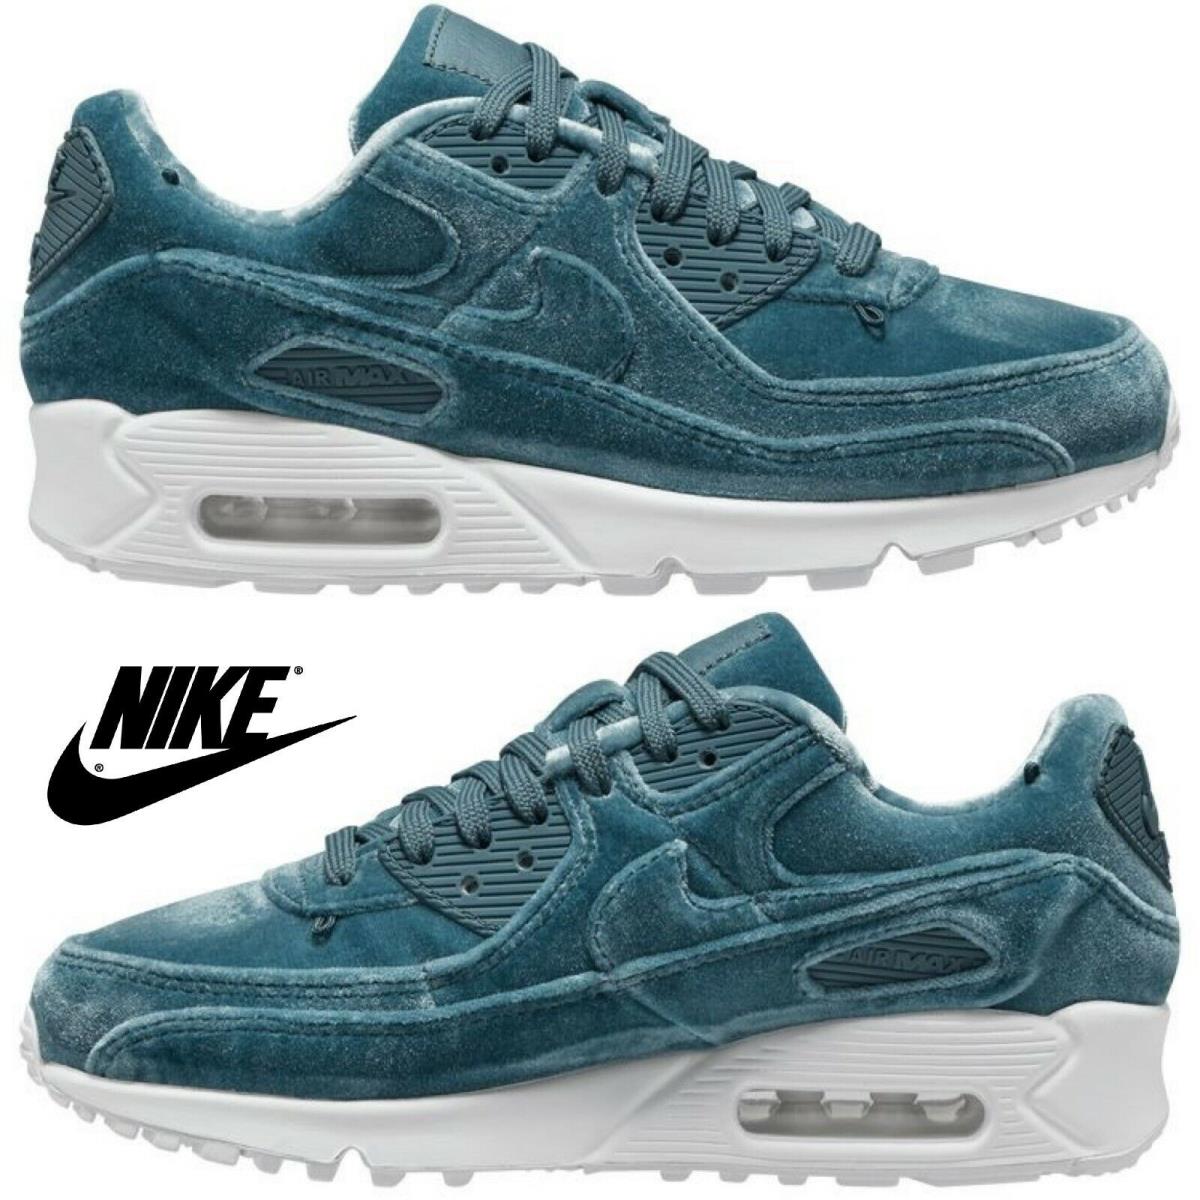 Nike Air Max 90 Women s Sneakers Casual Shoes Premium Running Sport Gym